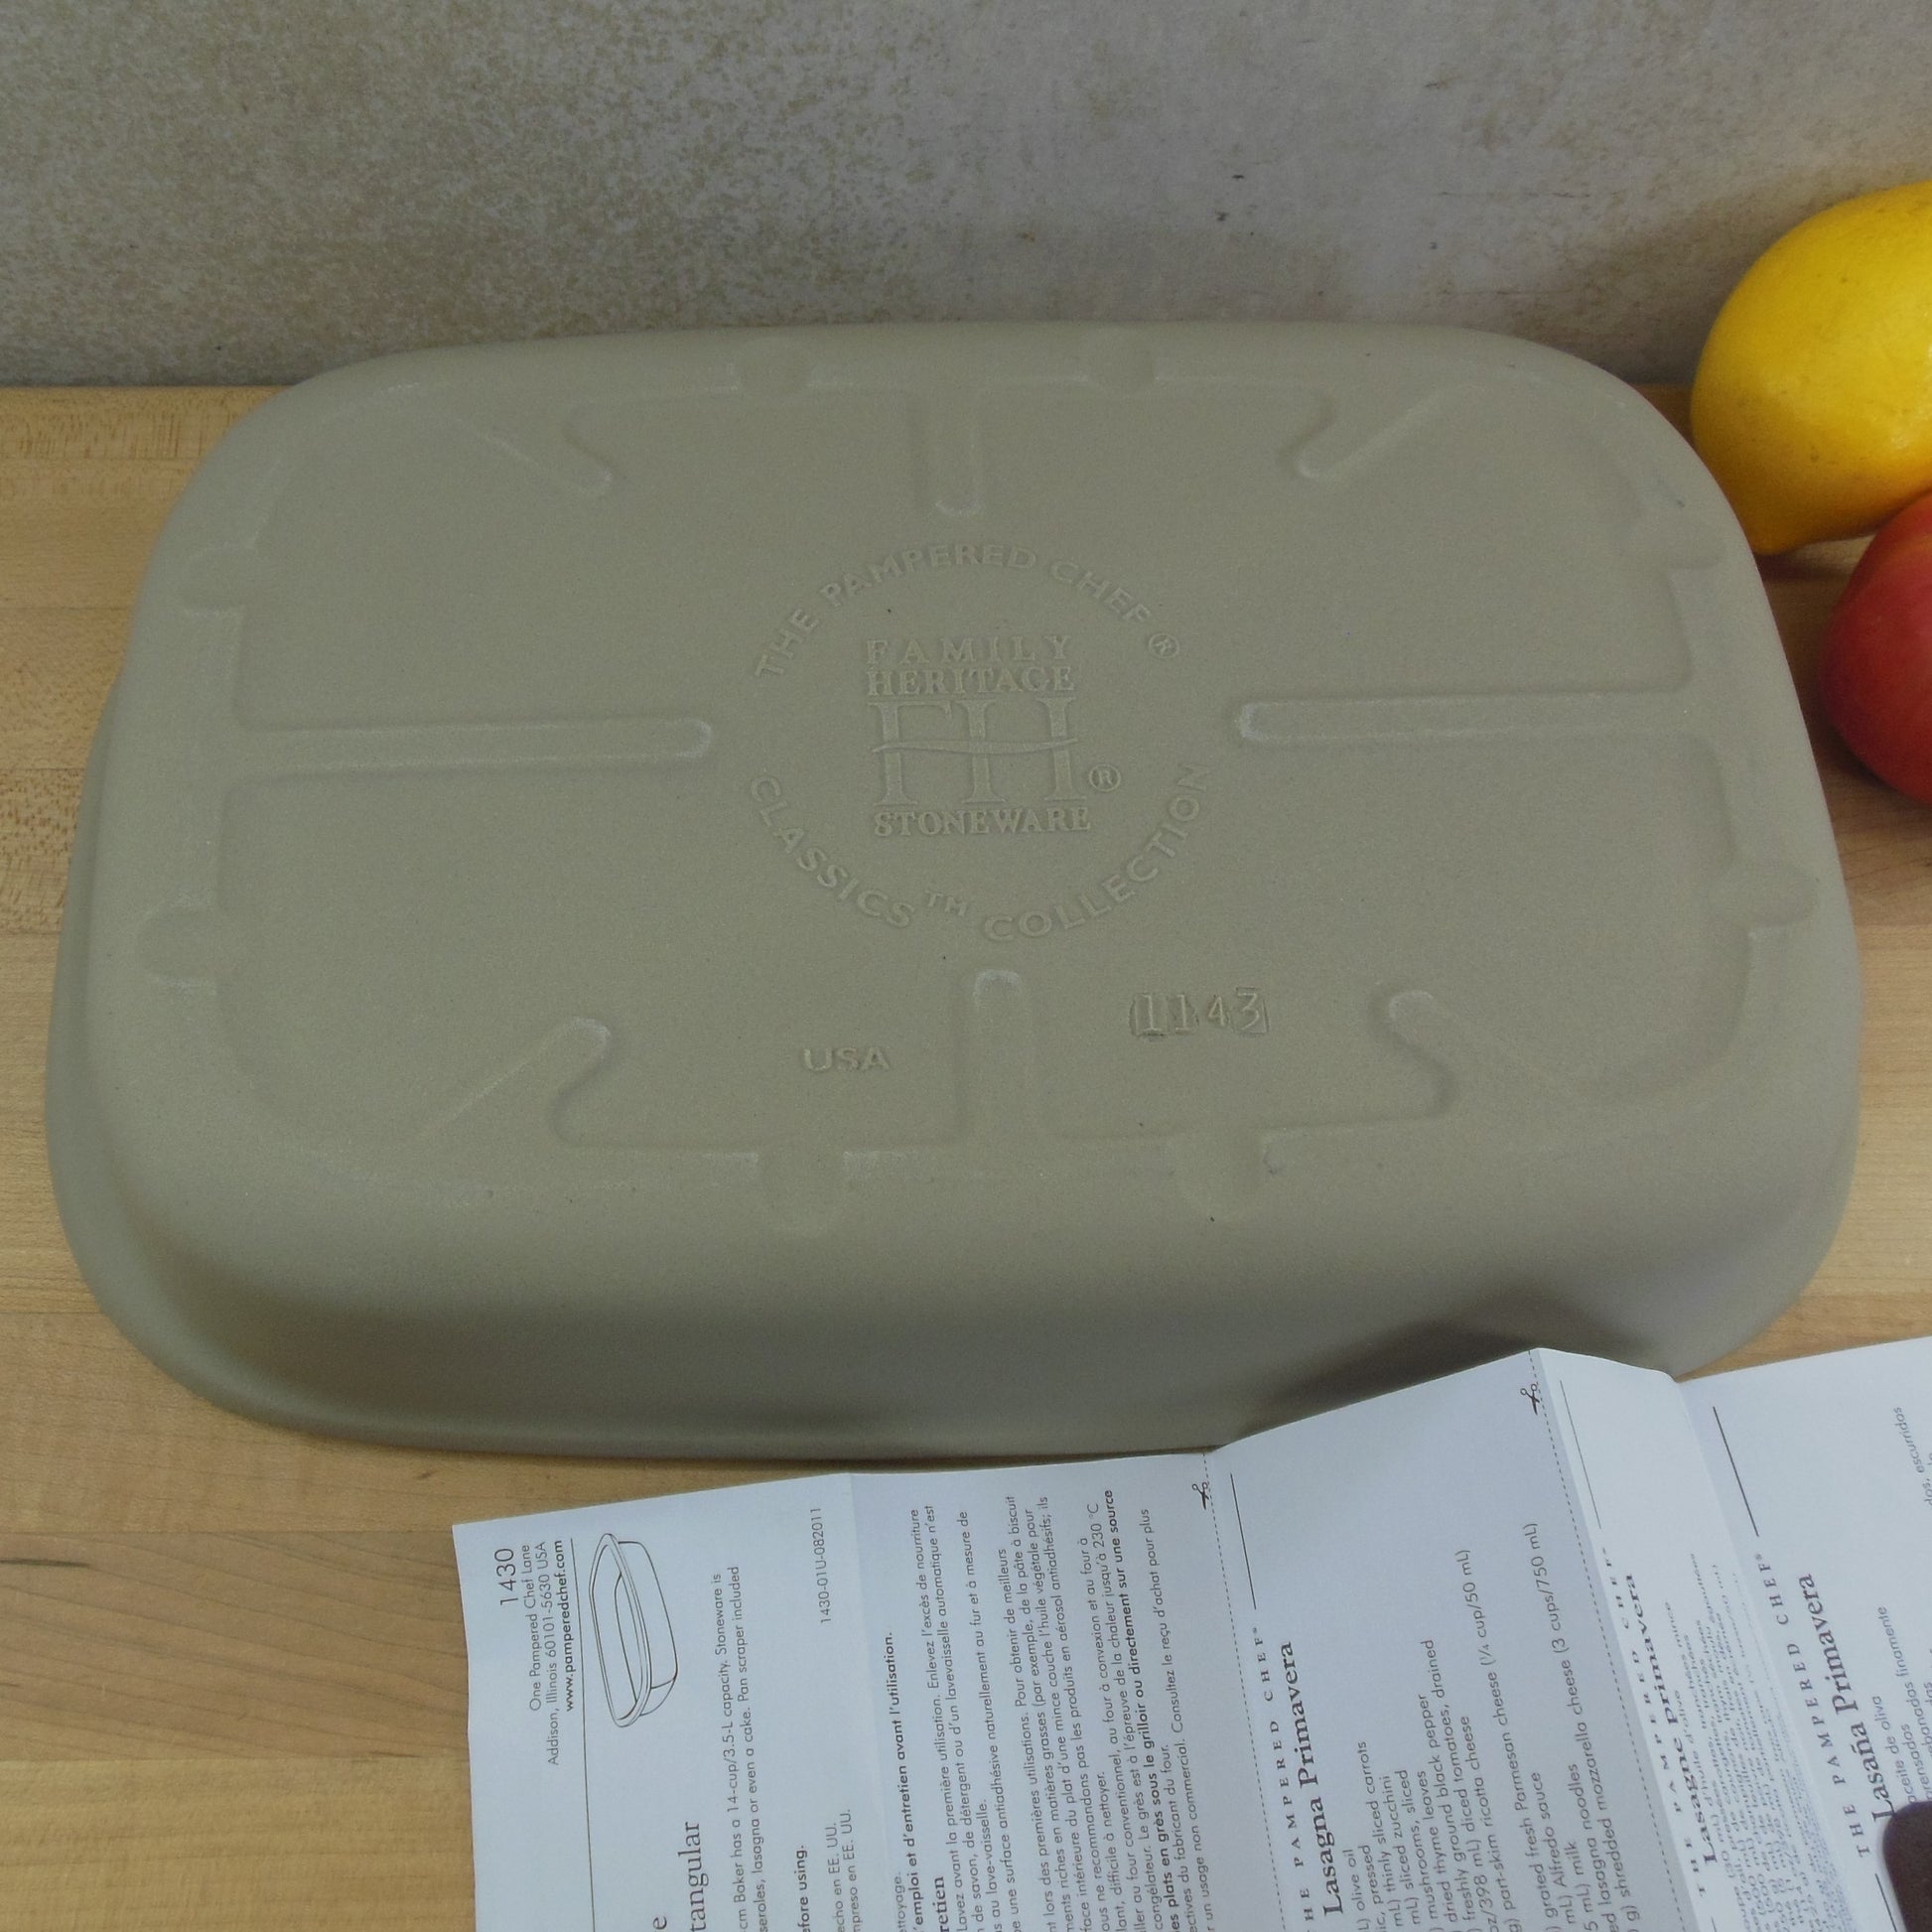 Pampered Chef 9'' x 13'' (23-cm x 33-cm) Pan with Lid